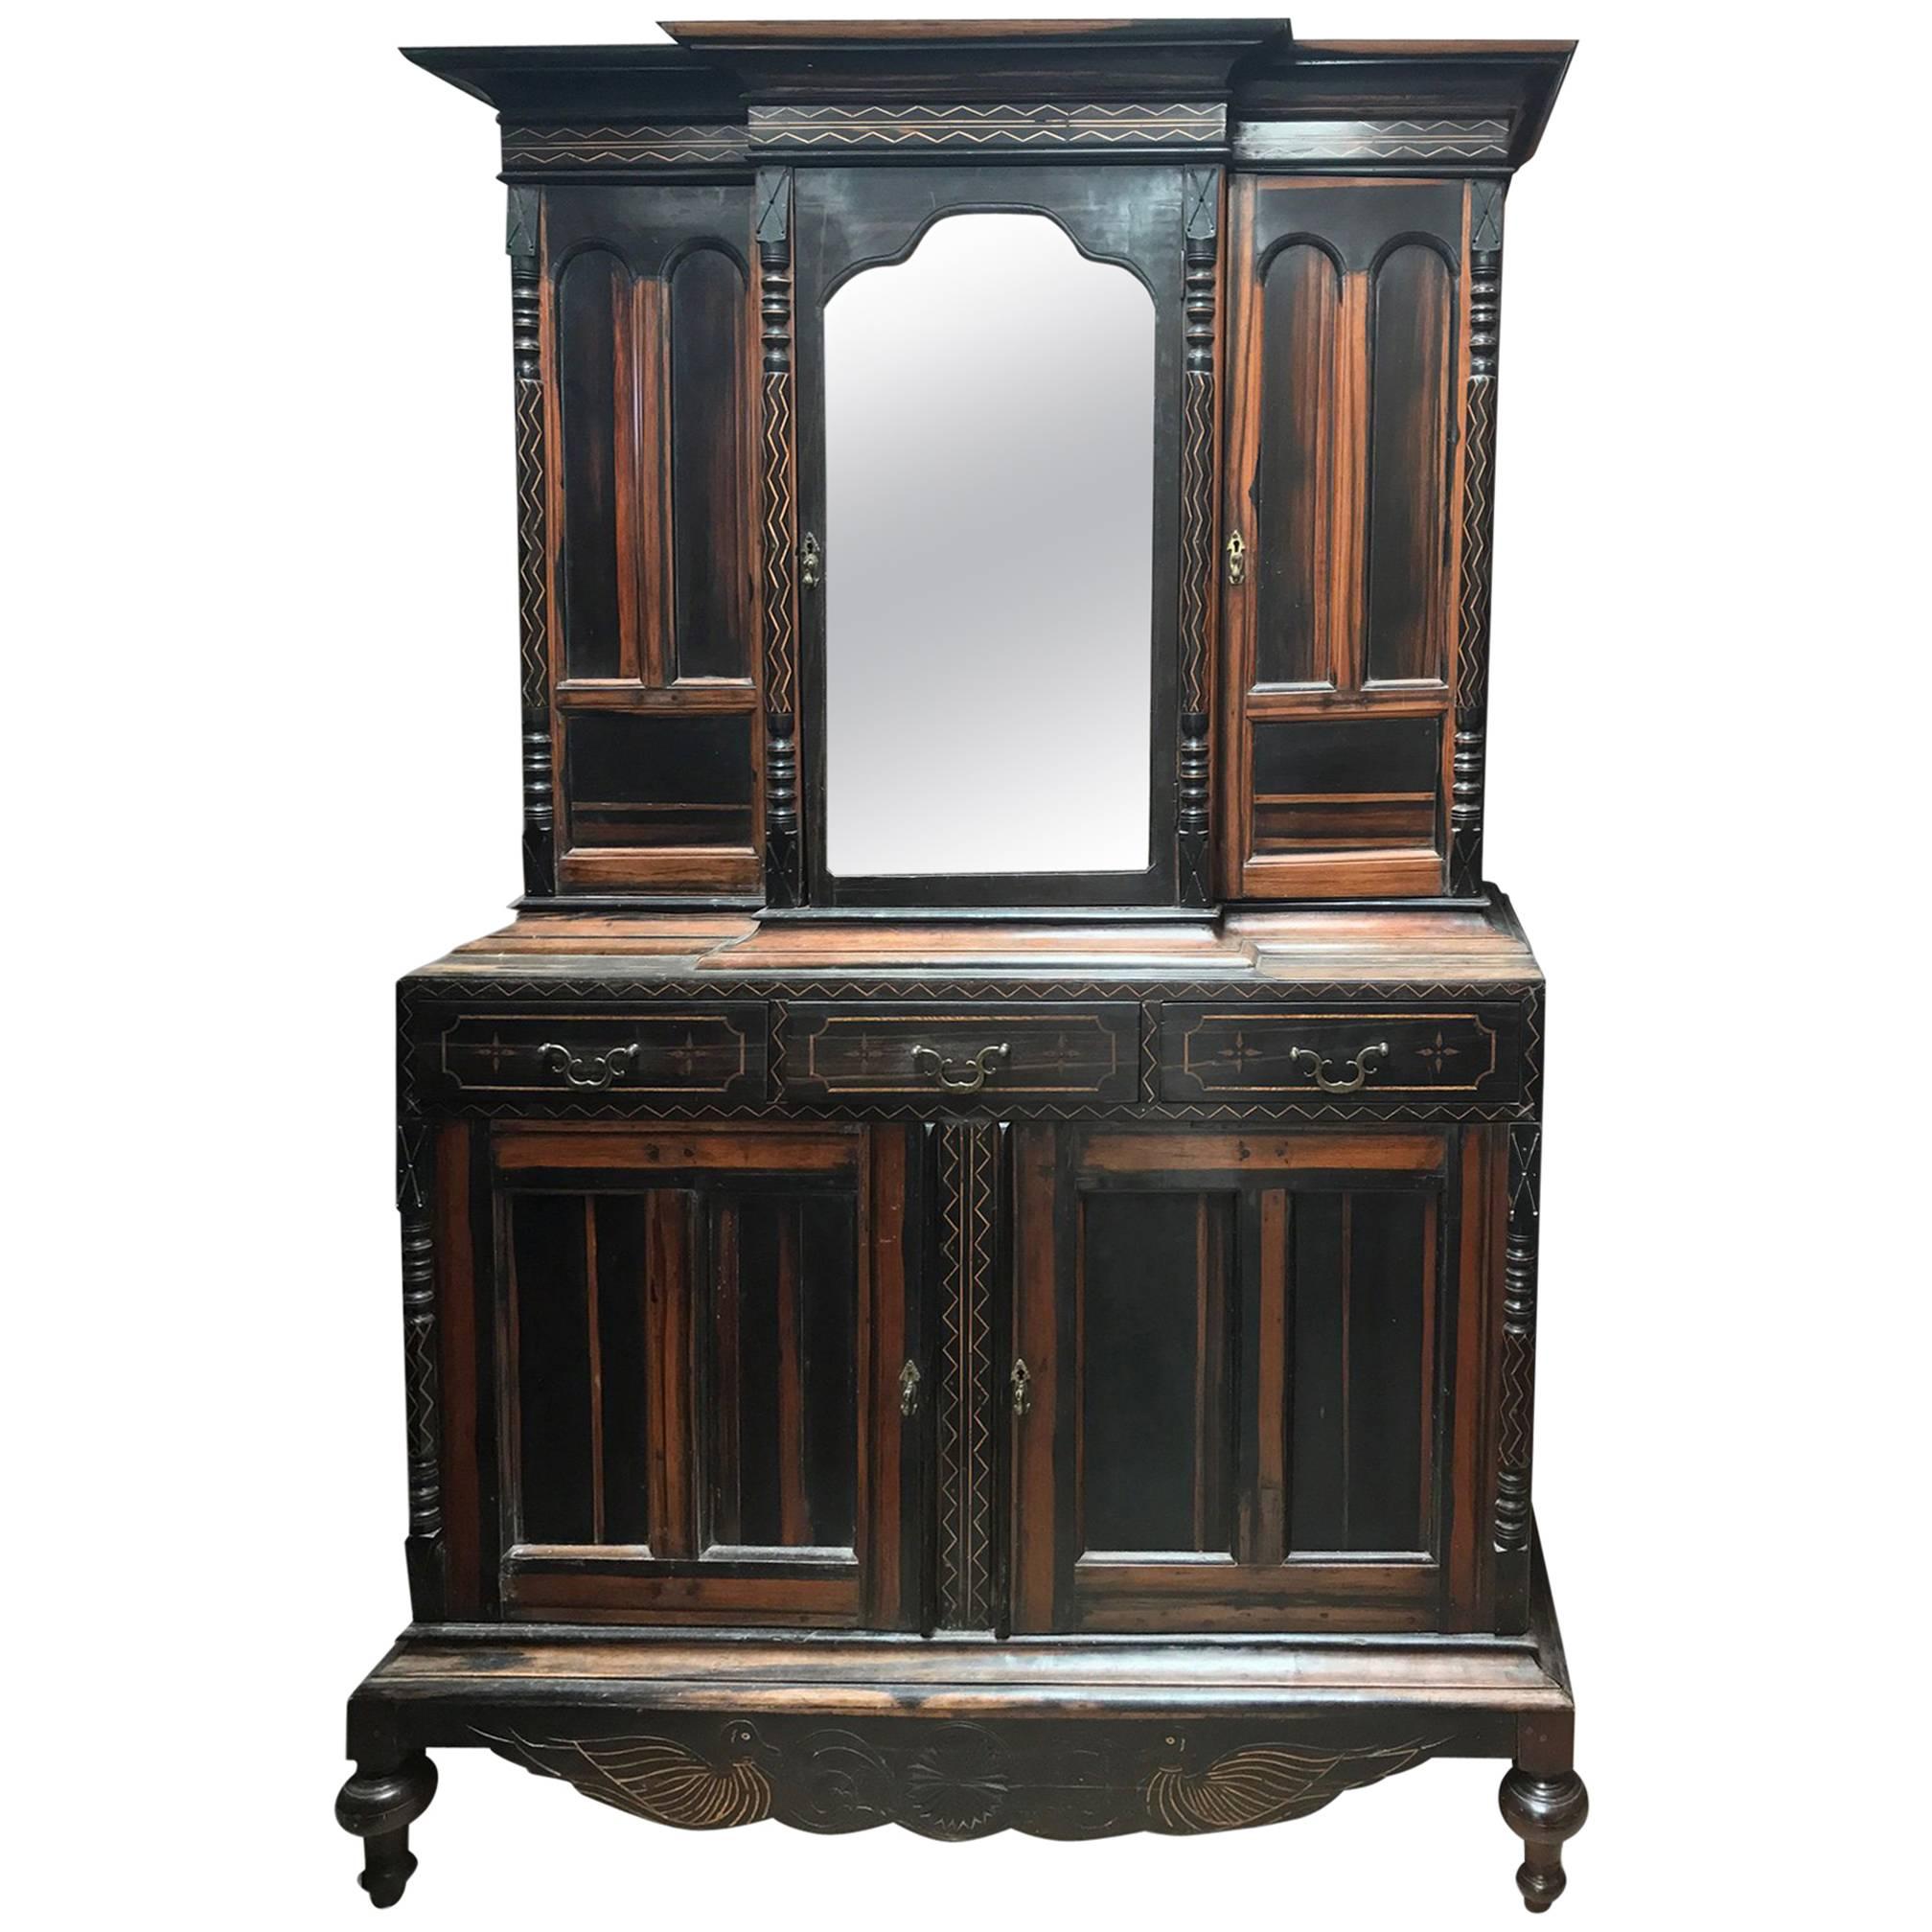 Very Rare Solid Ebony Anglo-Ceylonese Cabinet For Sale